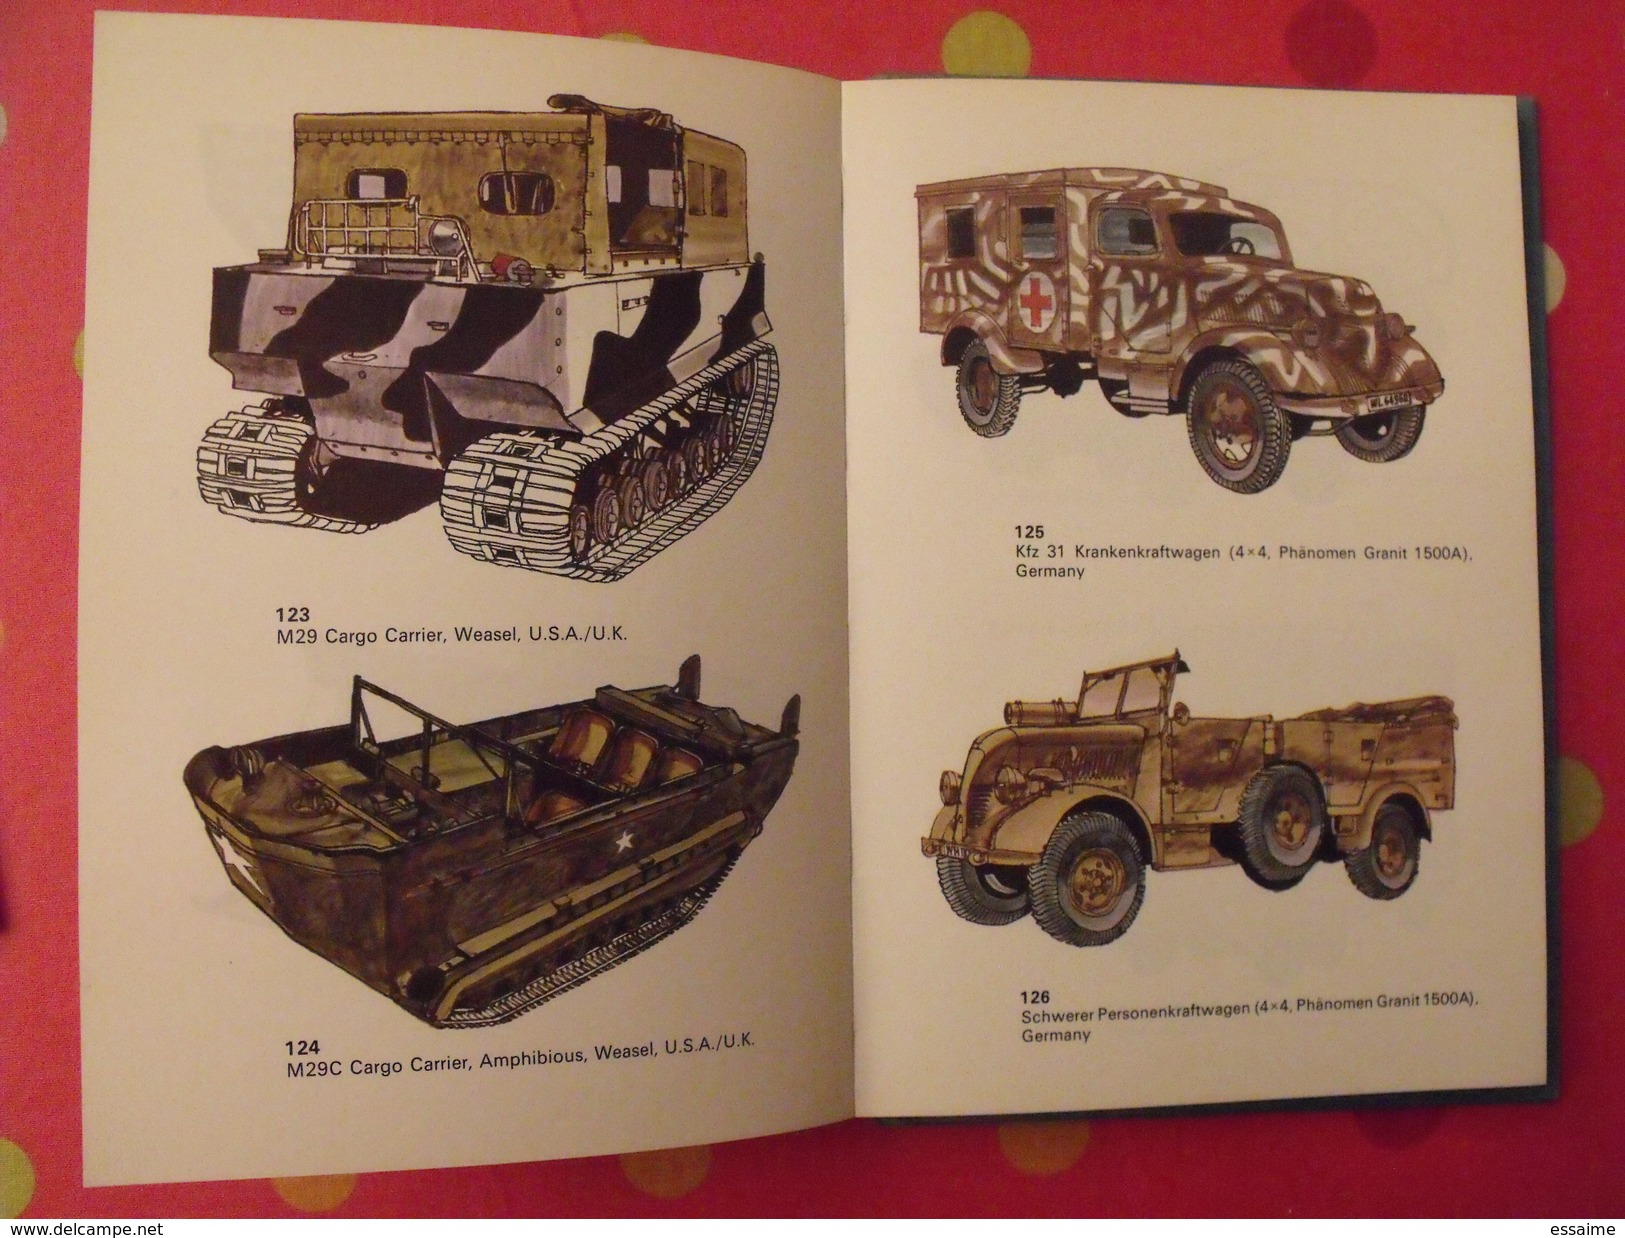 military transport of world war II. camions militaires. bishop. 1975. en anglais. guerre 39-45. blandford